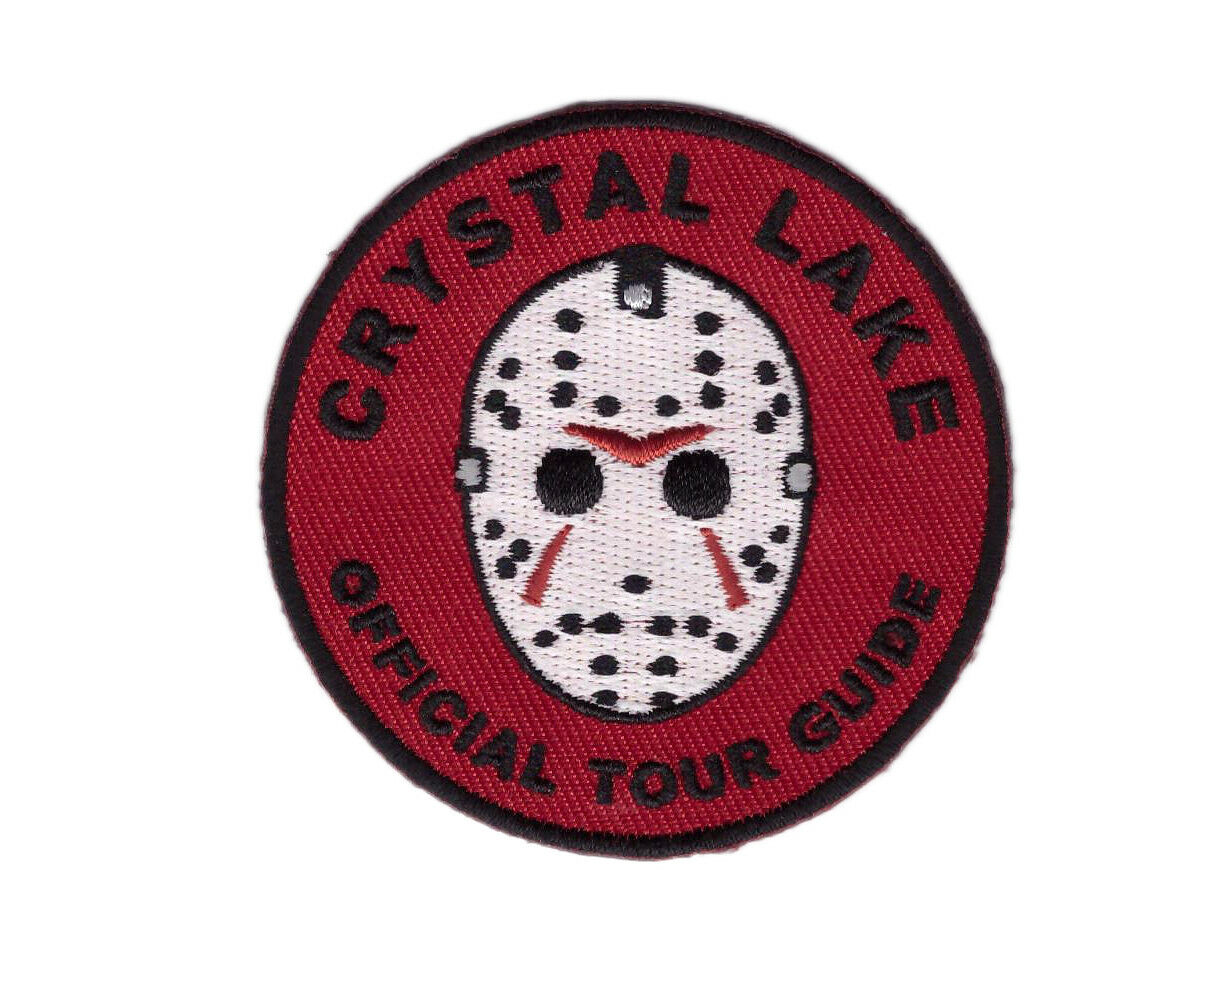 Crystal Lake Official Guide Jason Patch for VELCRO® BRAND Hook Fasteners